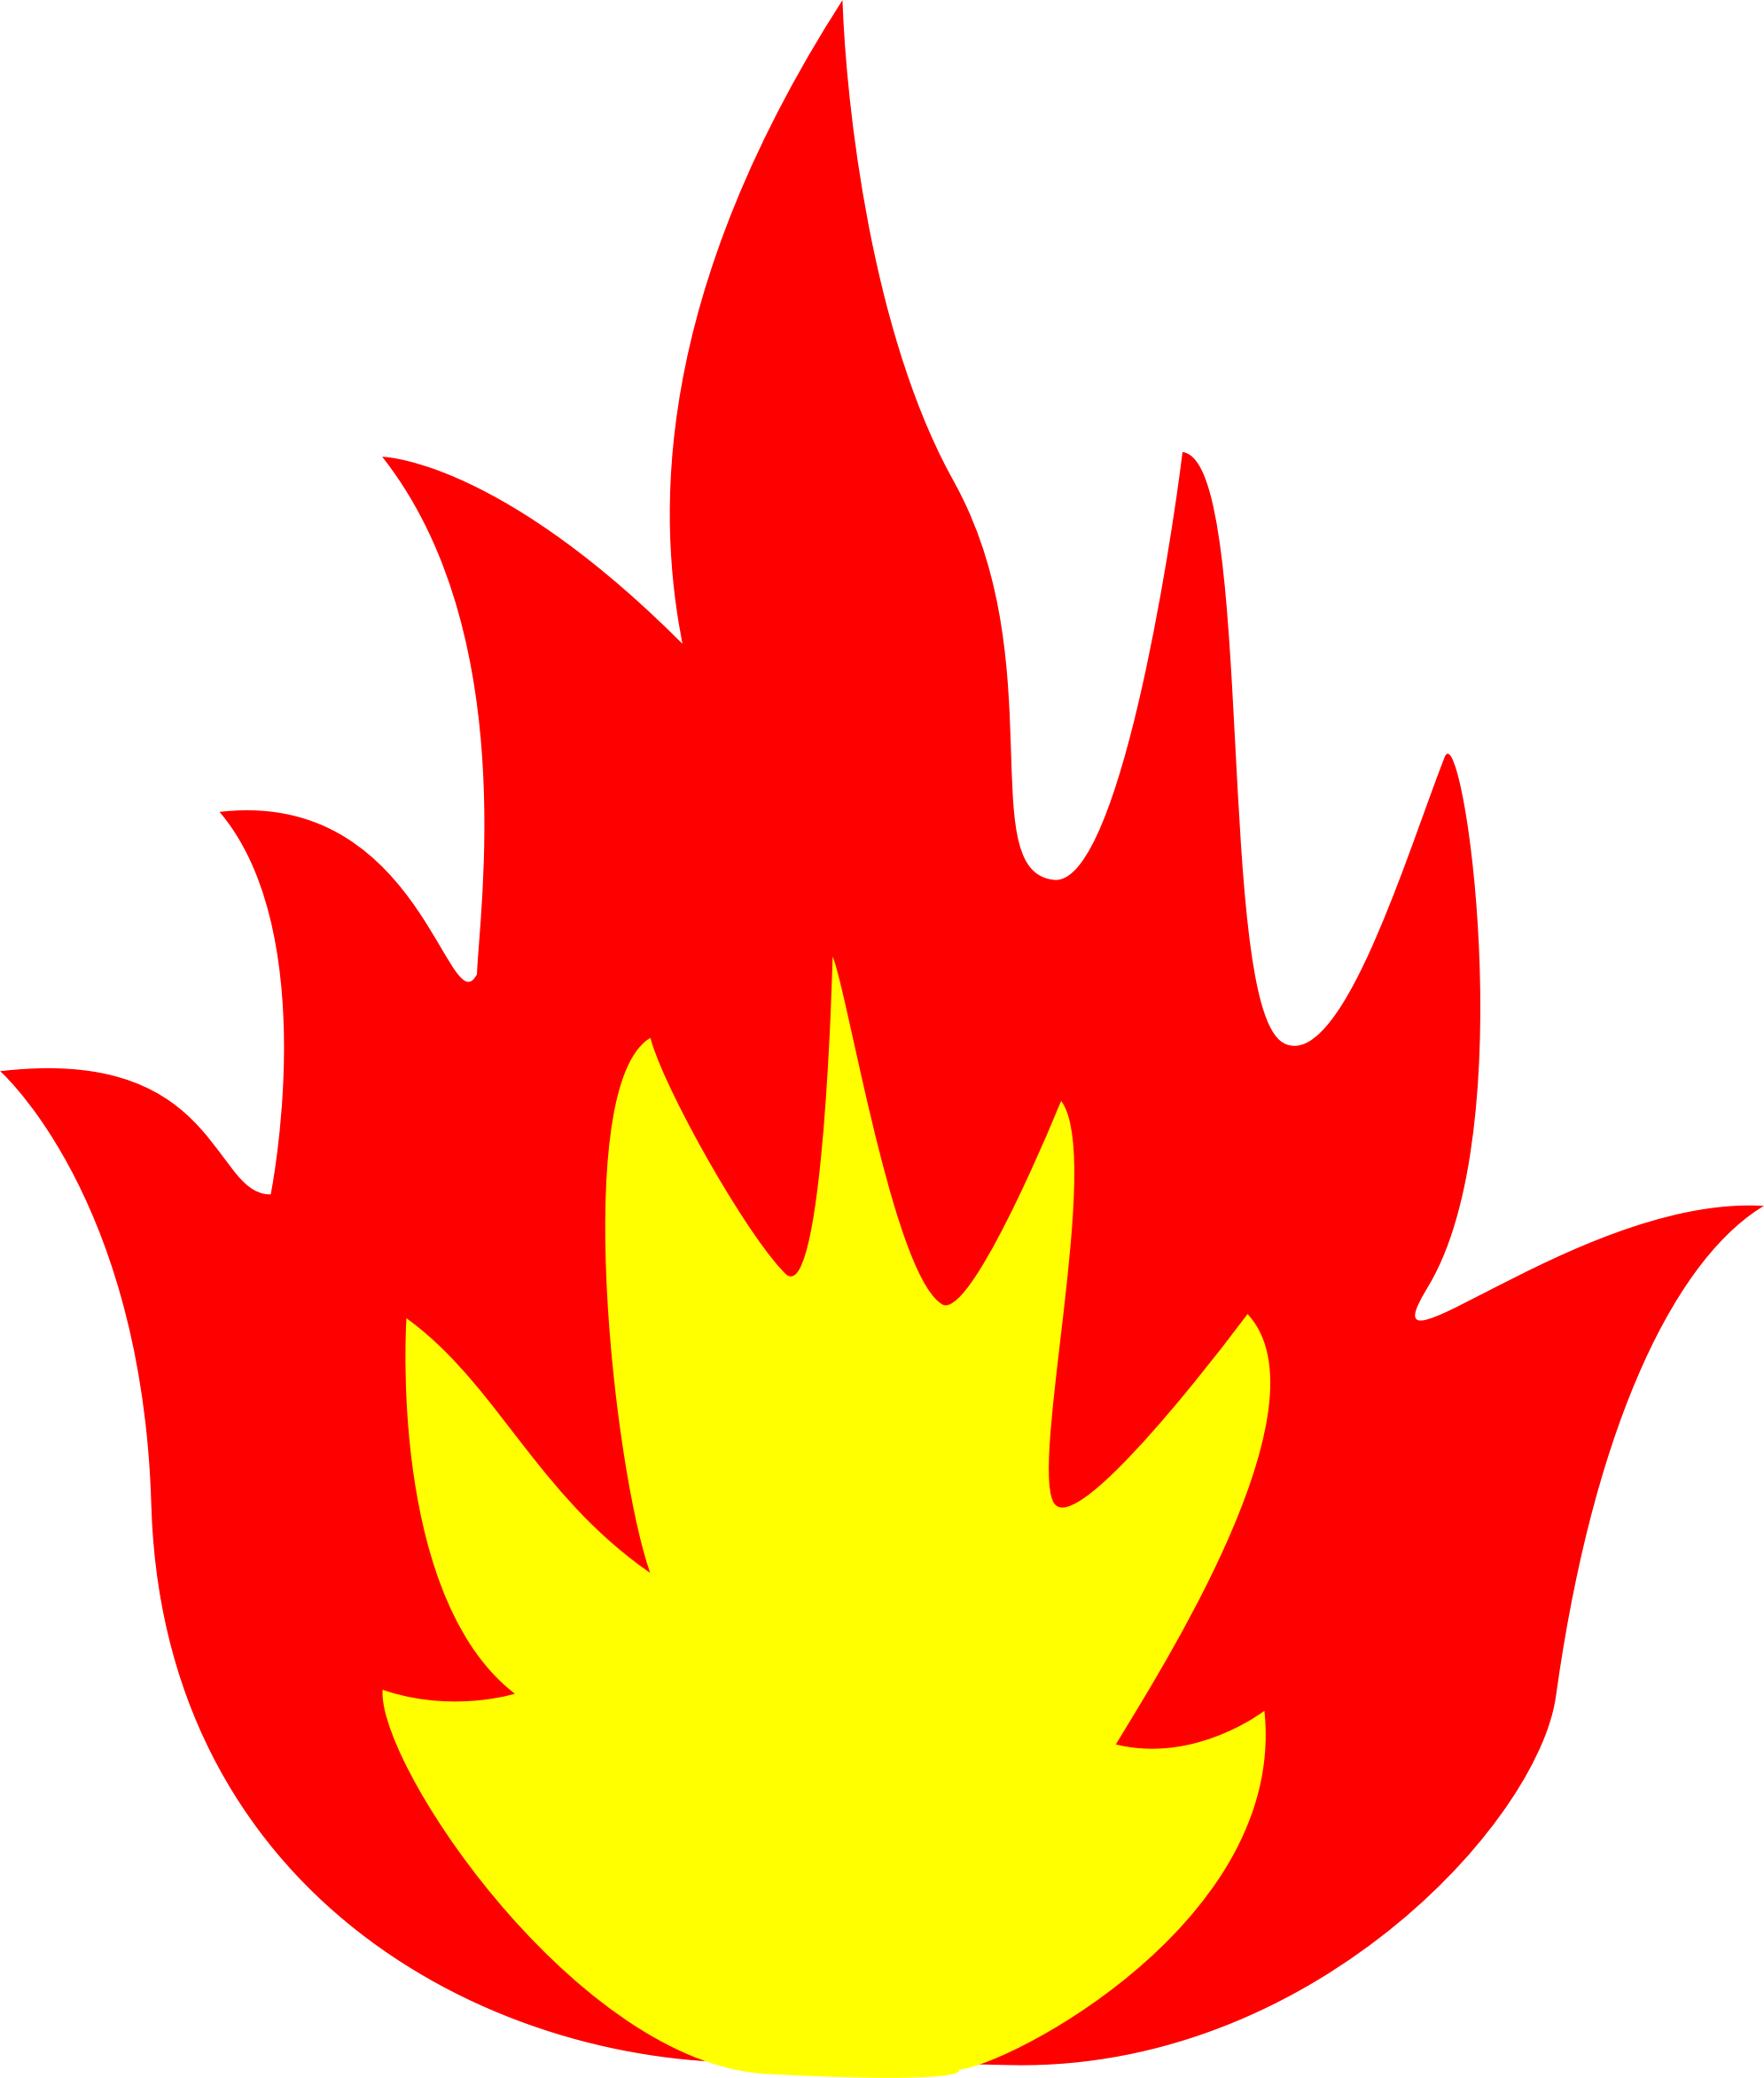 Fire big image png. Flame clipart single flame